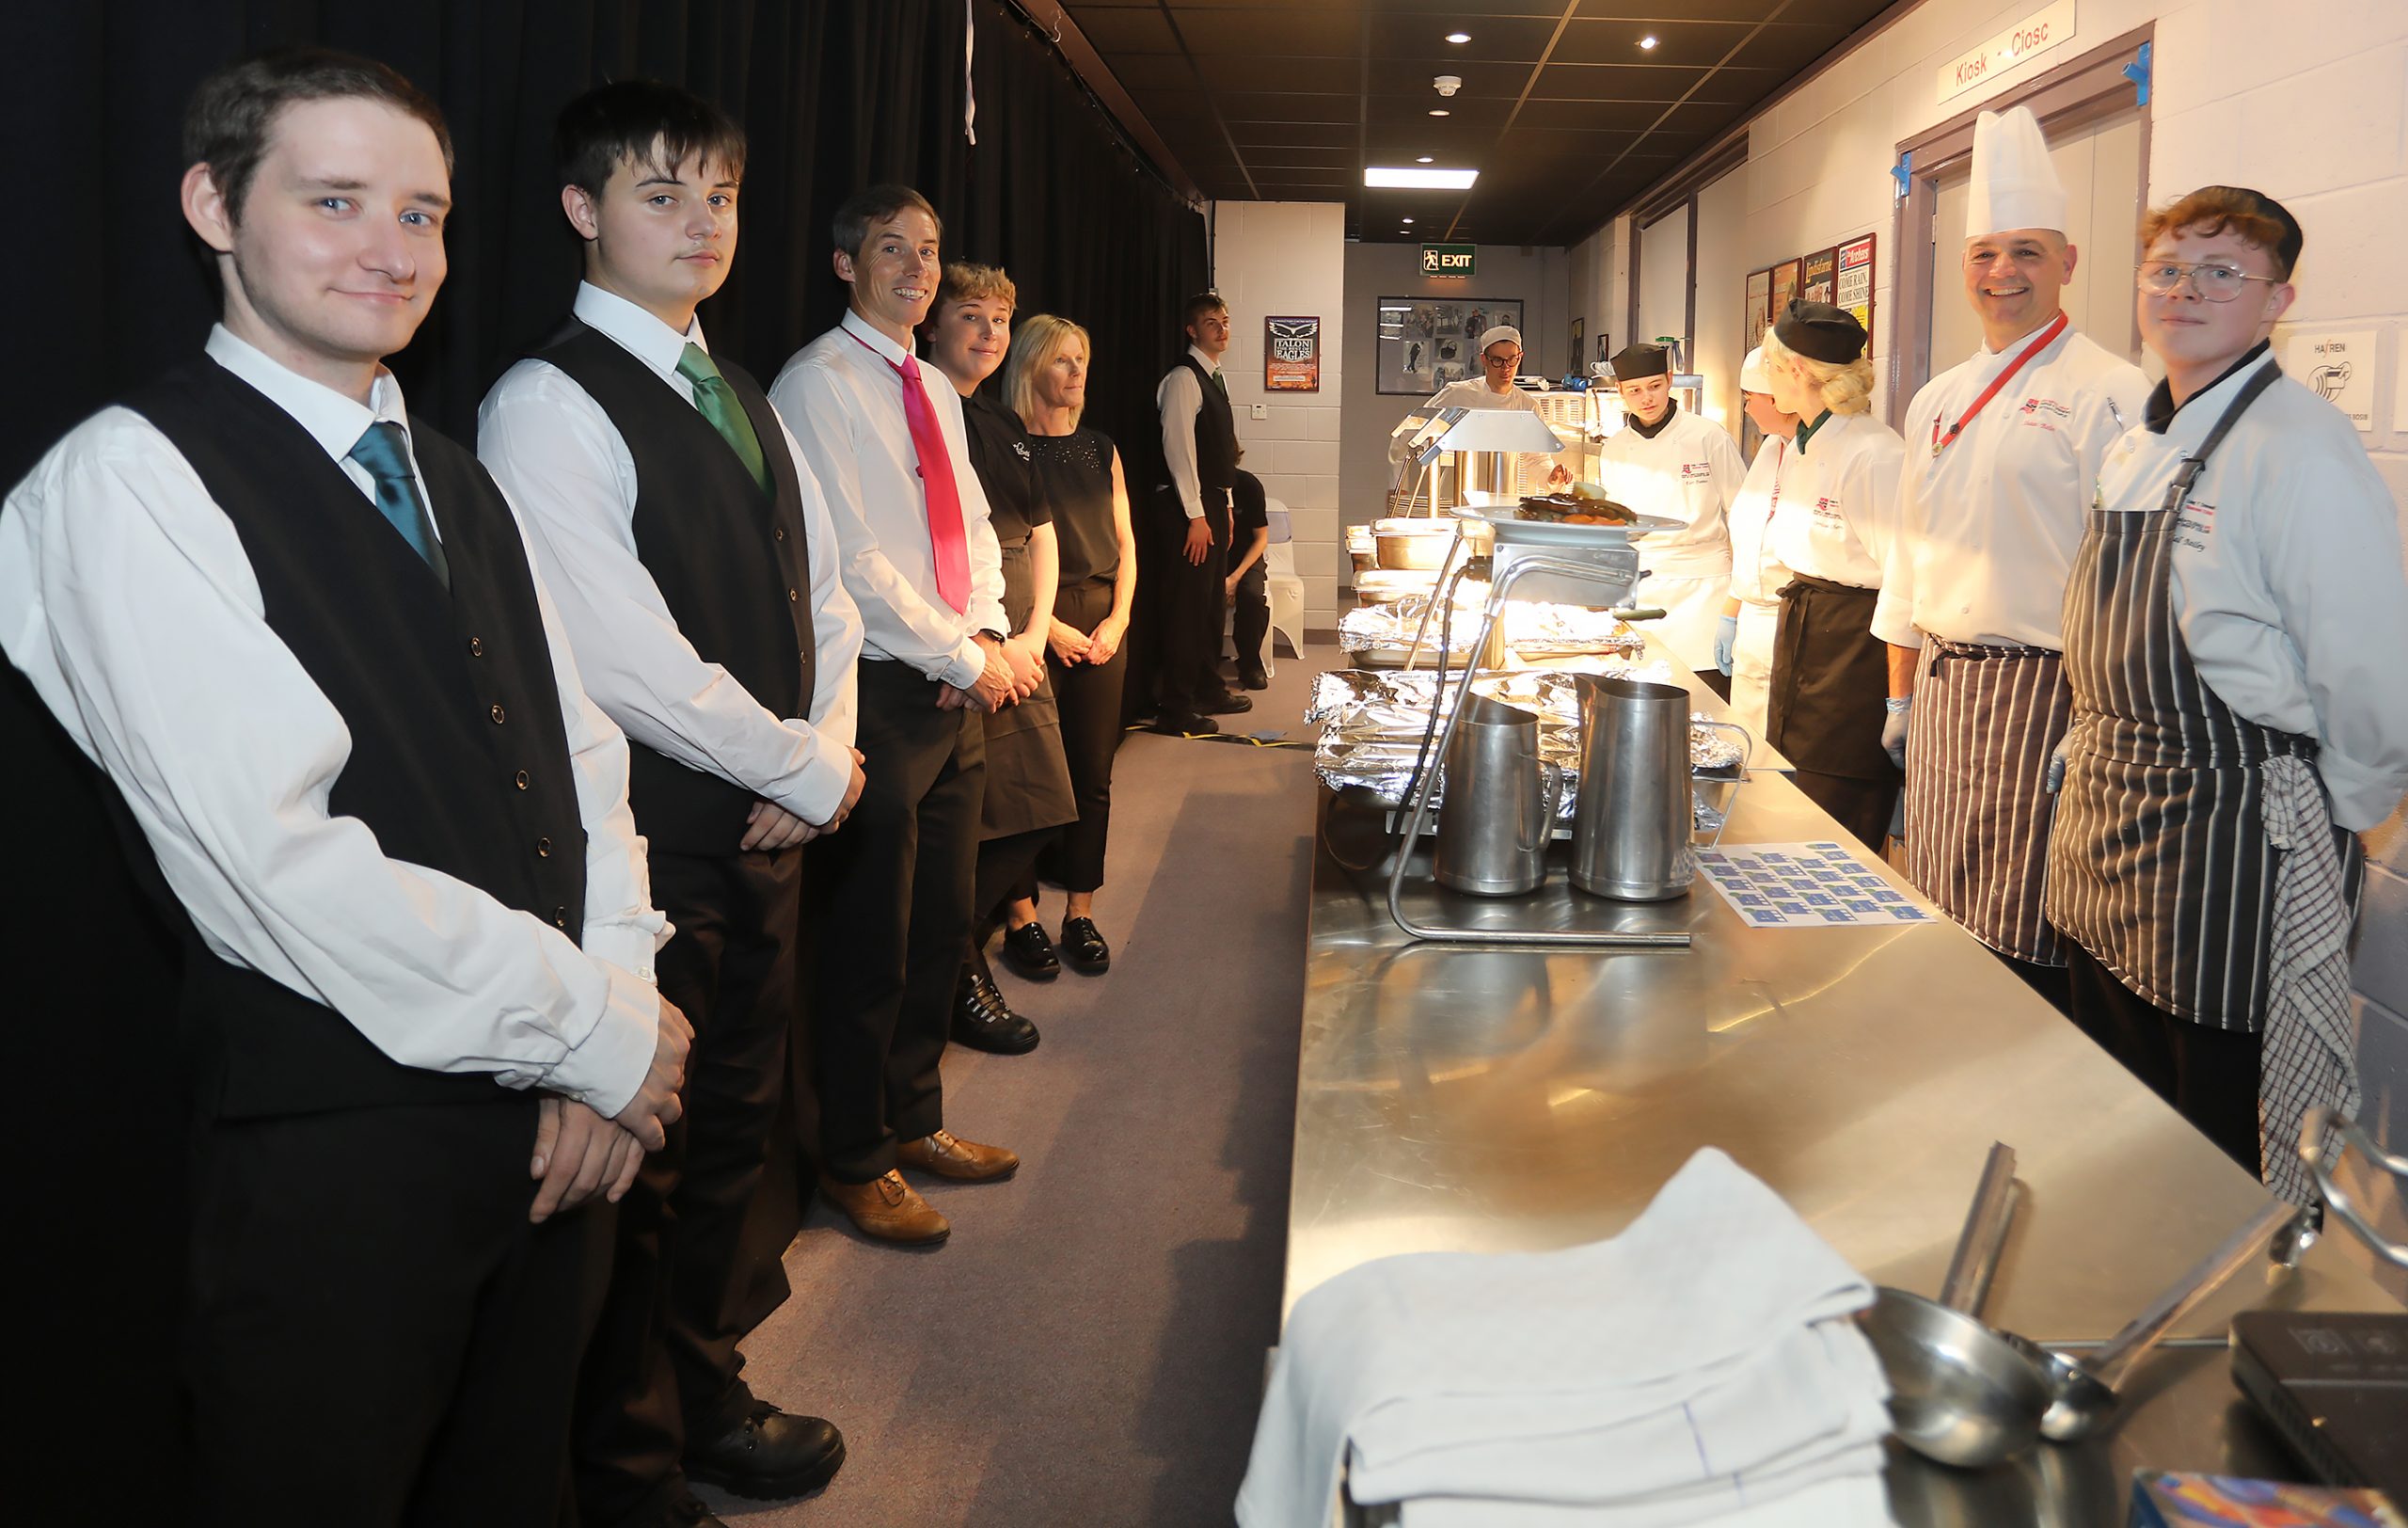 Catering & Hospitality students at Newtown College dressed formally, standing in line ready to serve guests at the Powys Business Awards